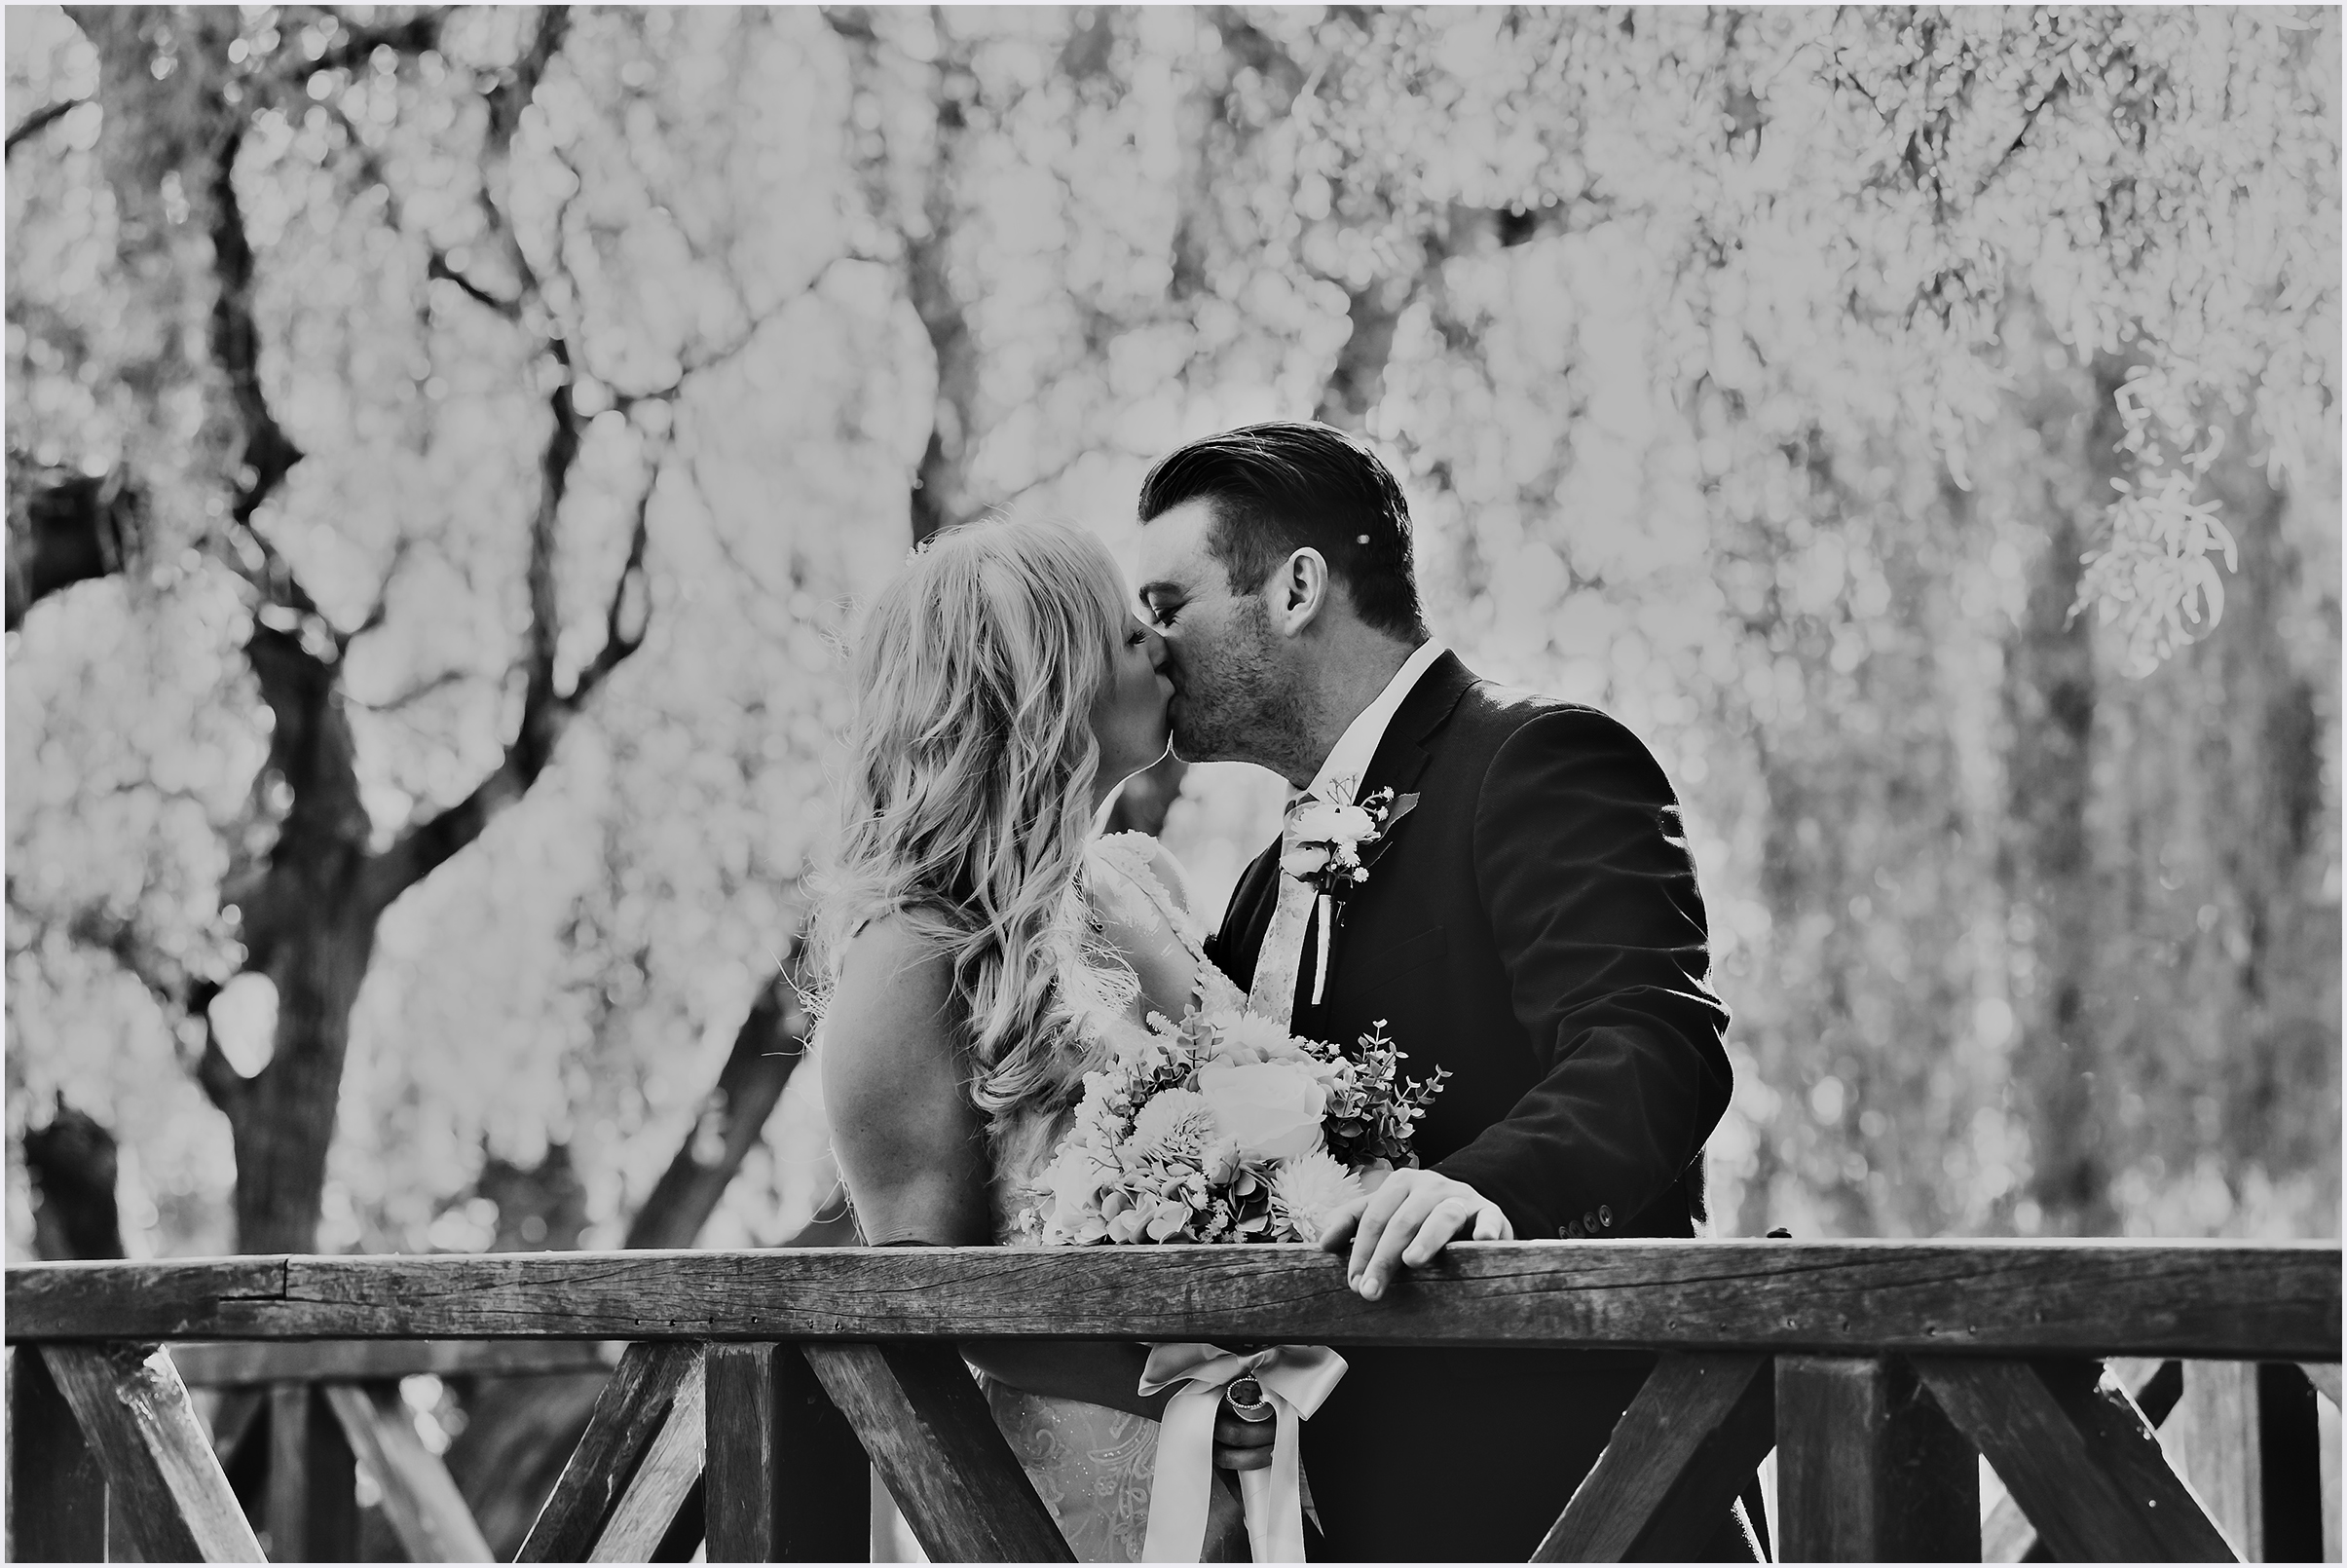 A groom rests his hand on the railing of a wooden bridge as he and his new wife share a kiss during their bride and groom photo shoot at The Grosvenor Pulford Hotel and Spa.